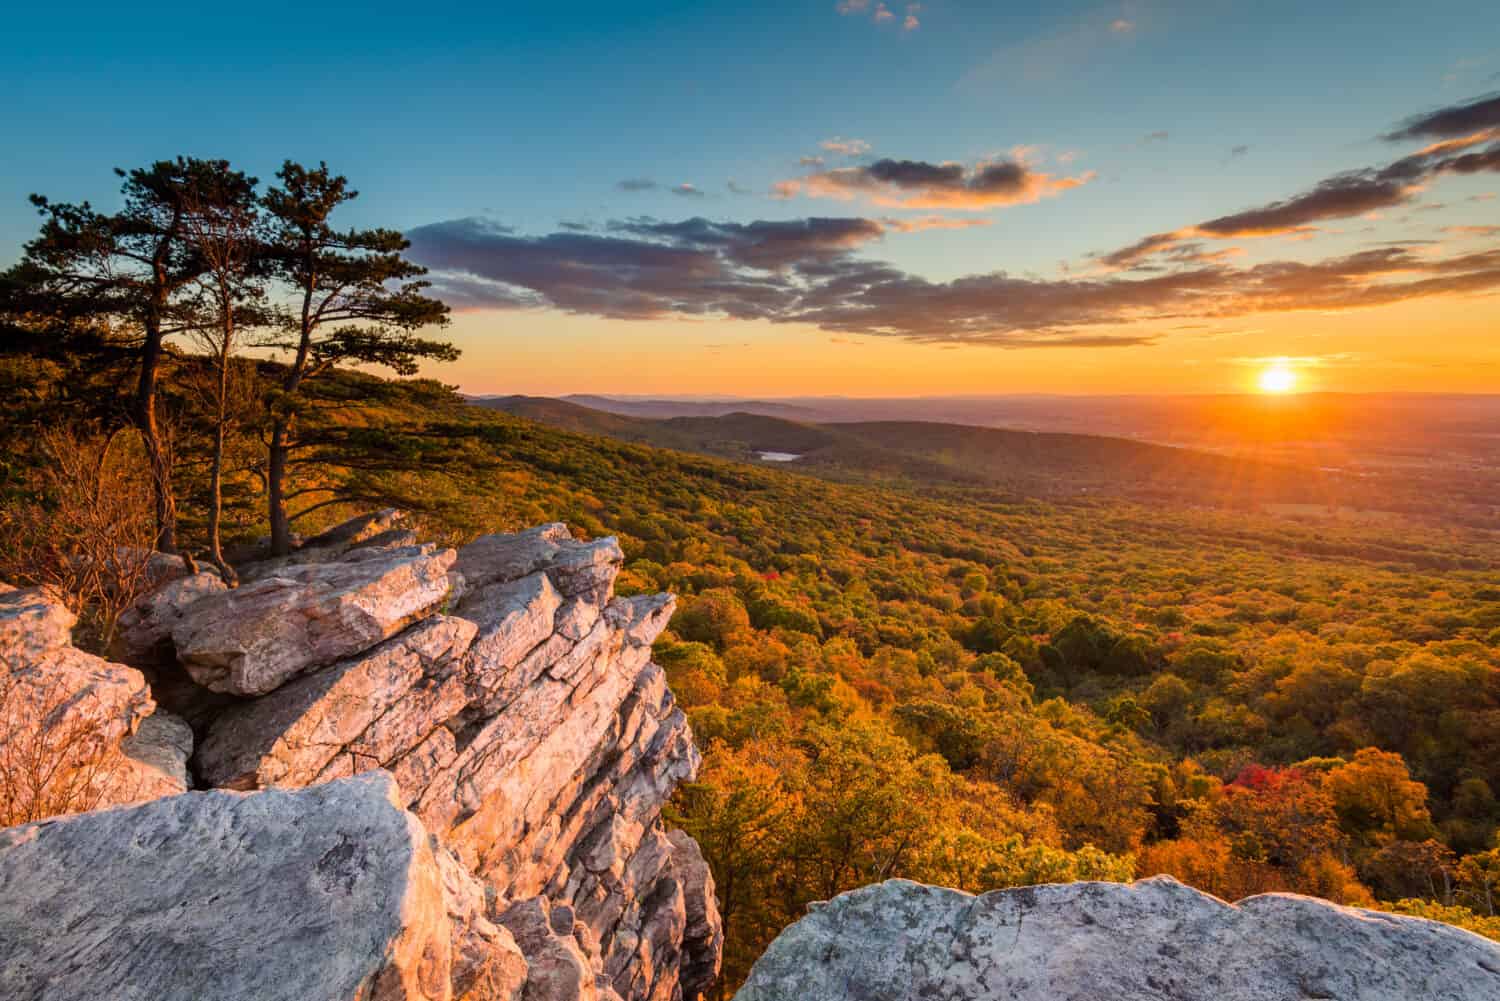 Sunset view from Annapolis Rocks, along the Appalachian Trail on South Mountain, Maryland